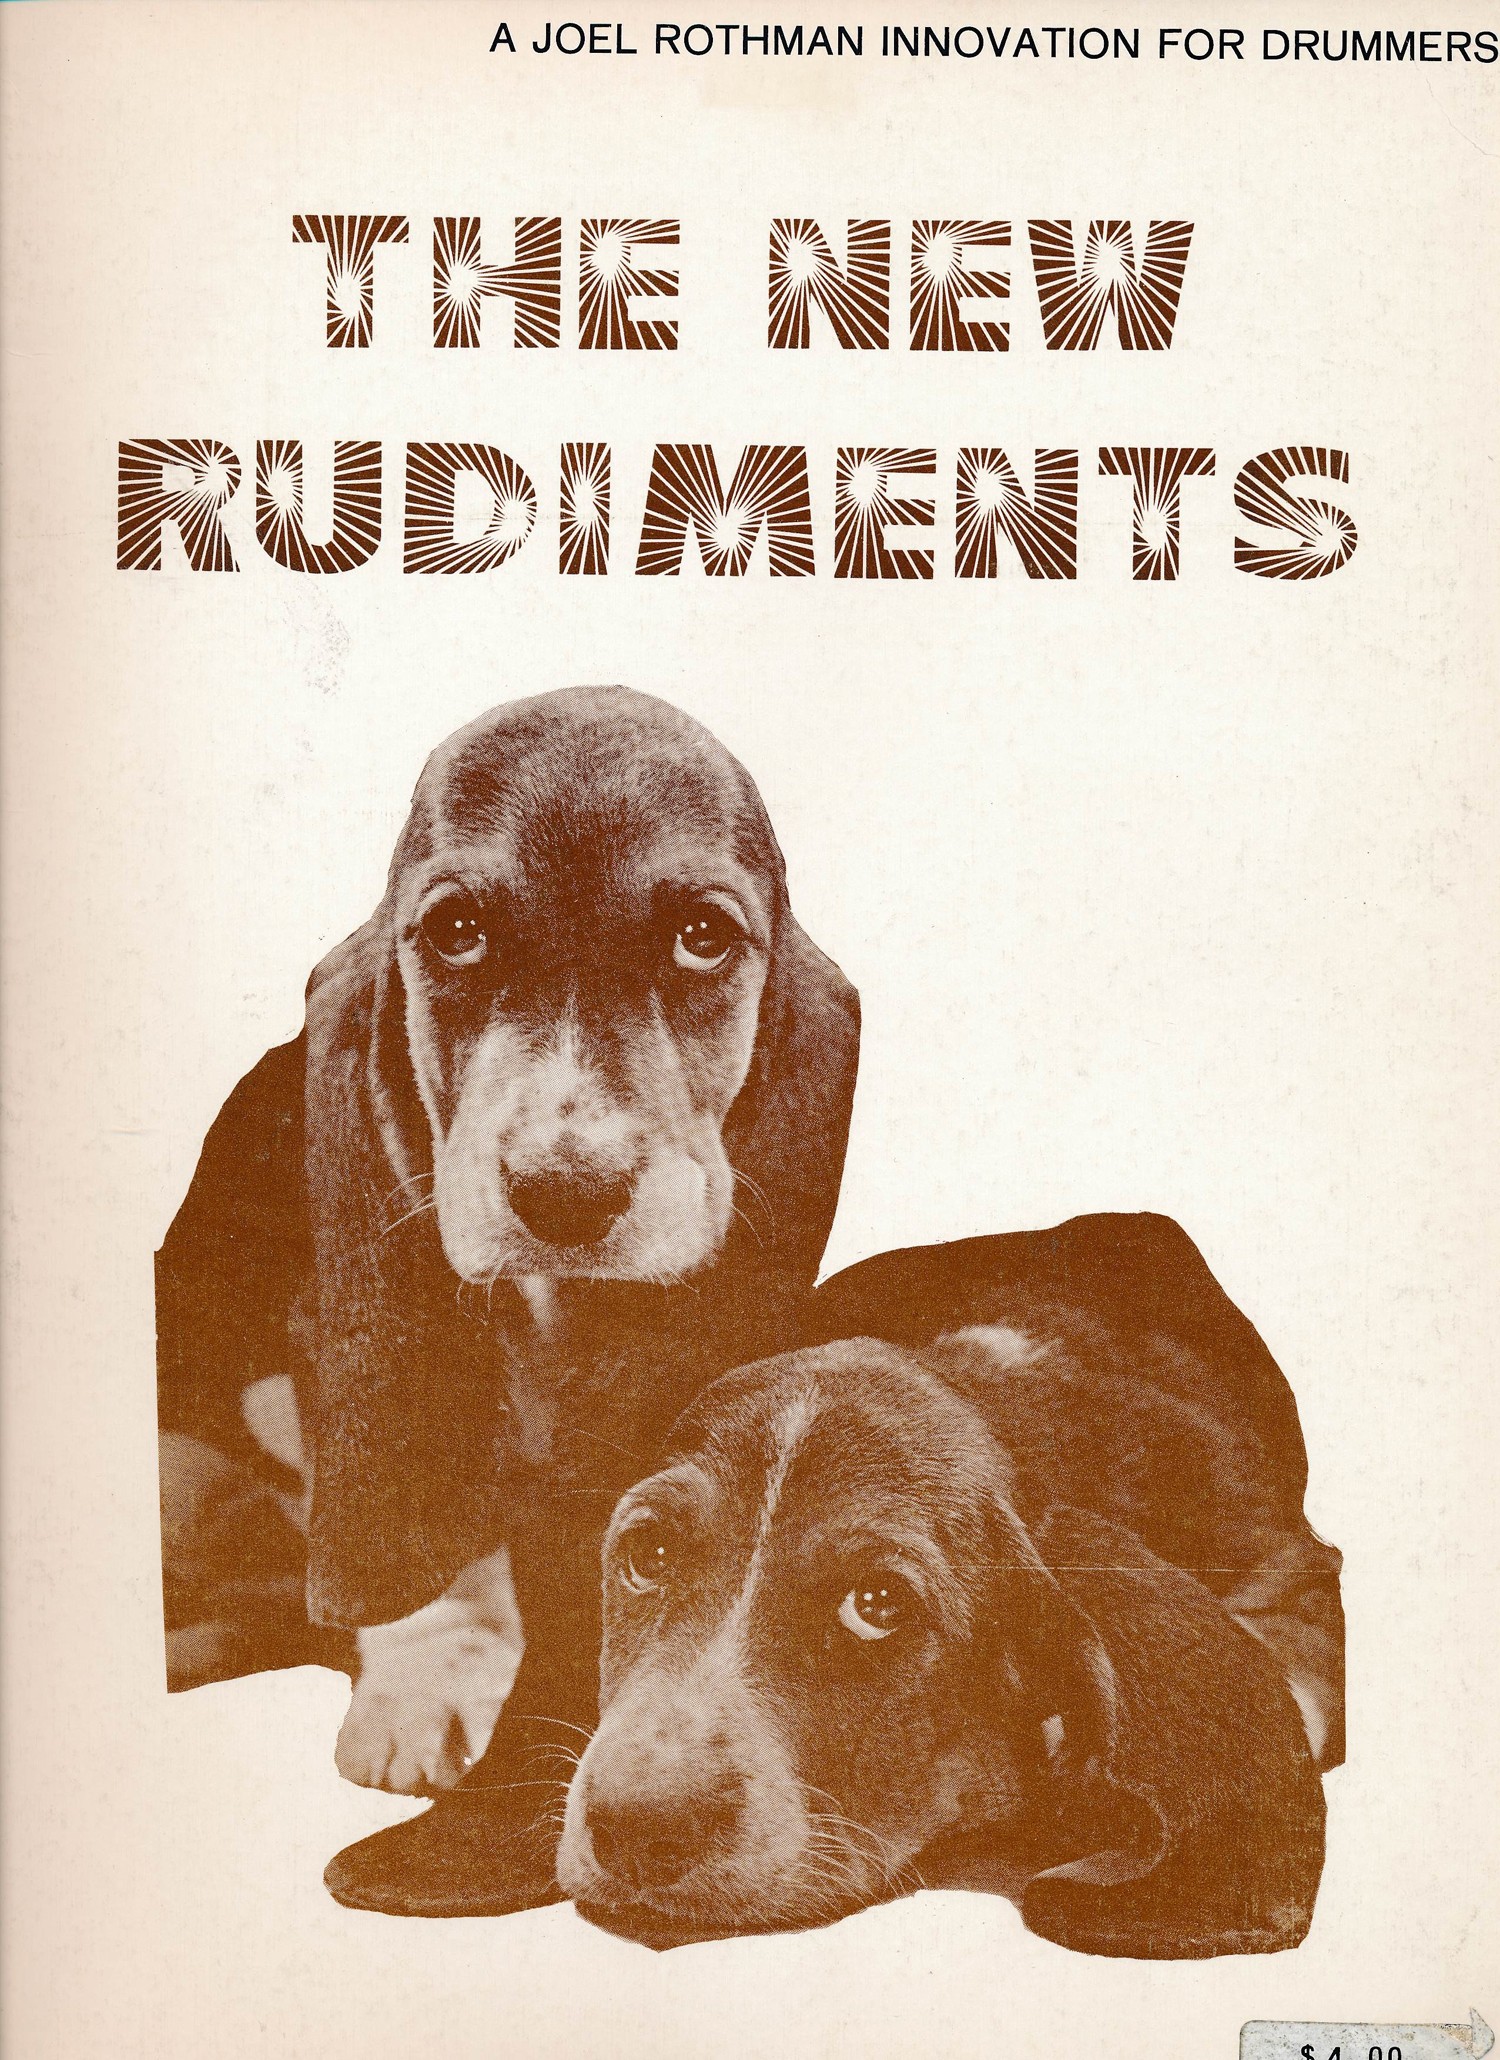 The New Rudiments